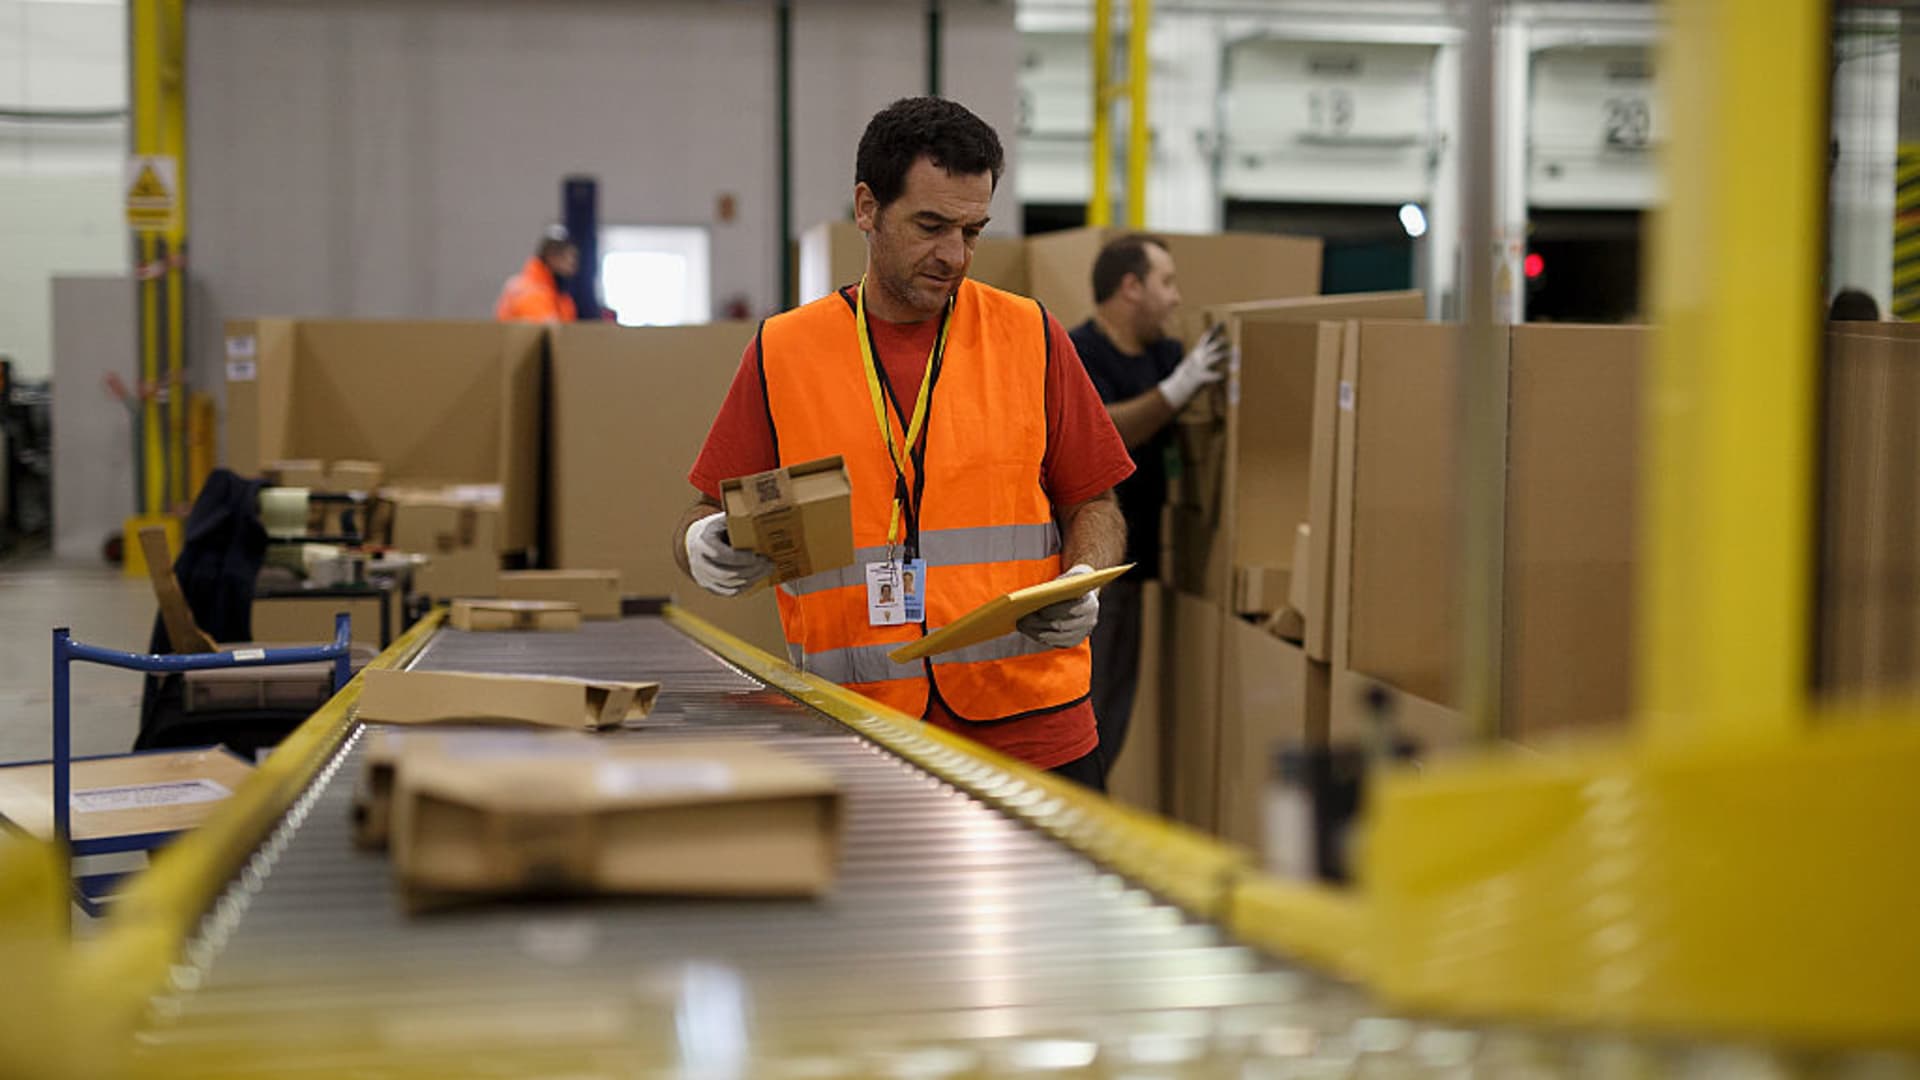 Amazon workers seriously injured at more than twice the rate of other warehouses, study finds